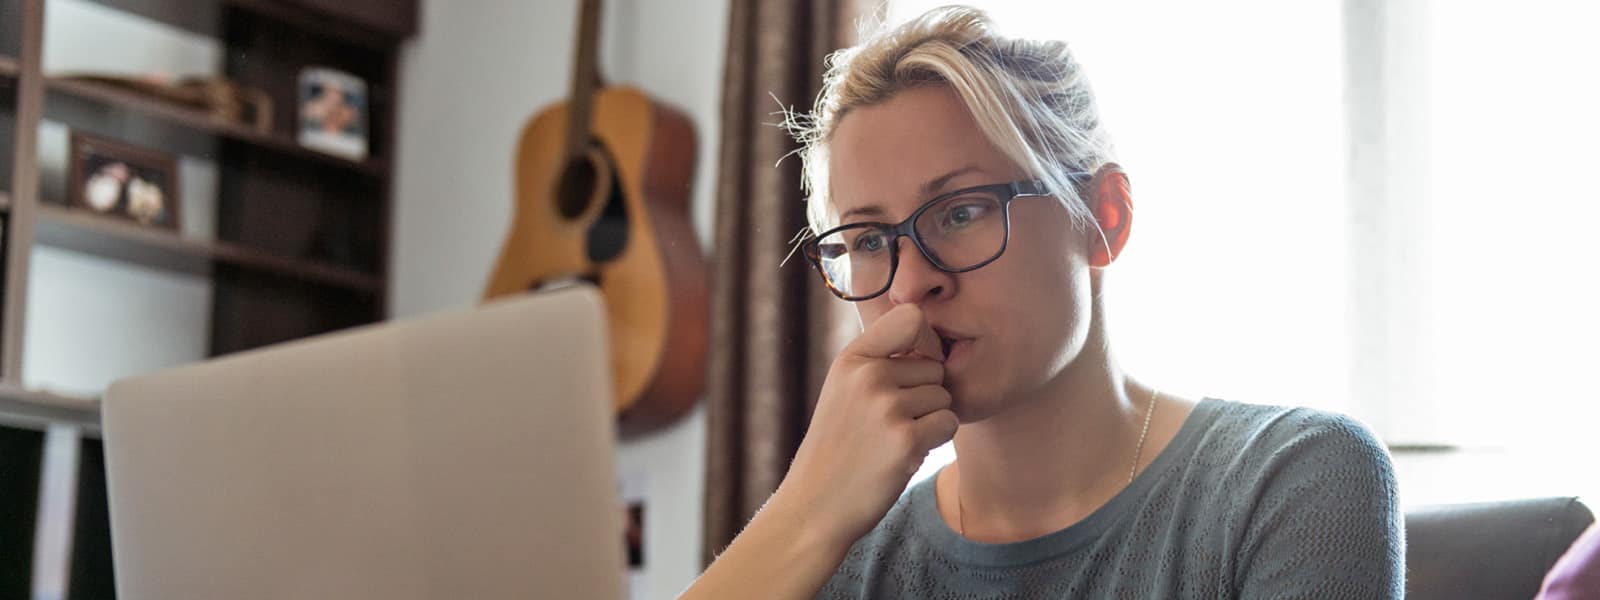 a blonde haired woman with black glasses looks concerningly at her laptop computer, indicating she might be a spear phishing victim